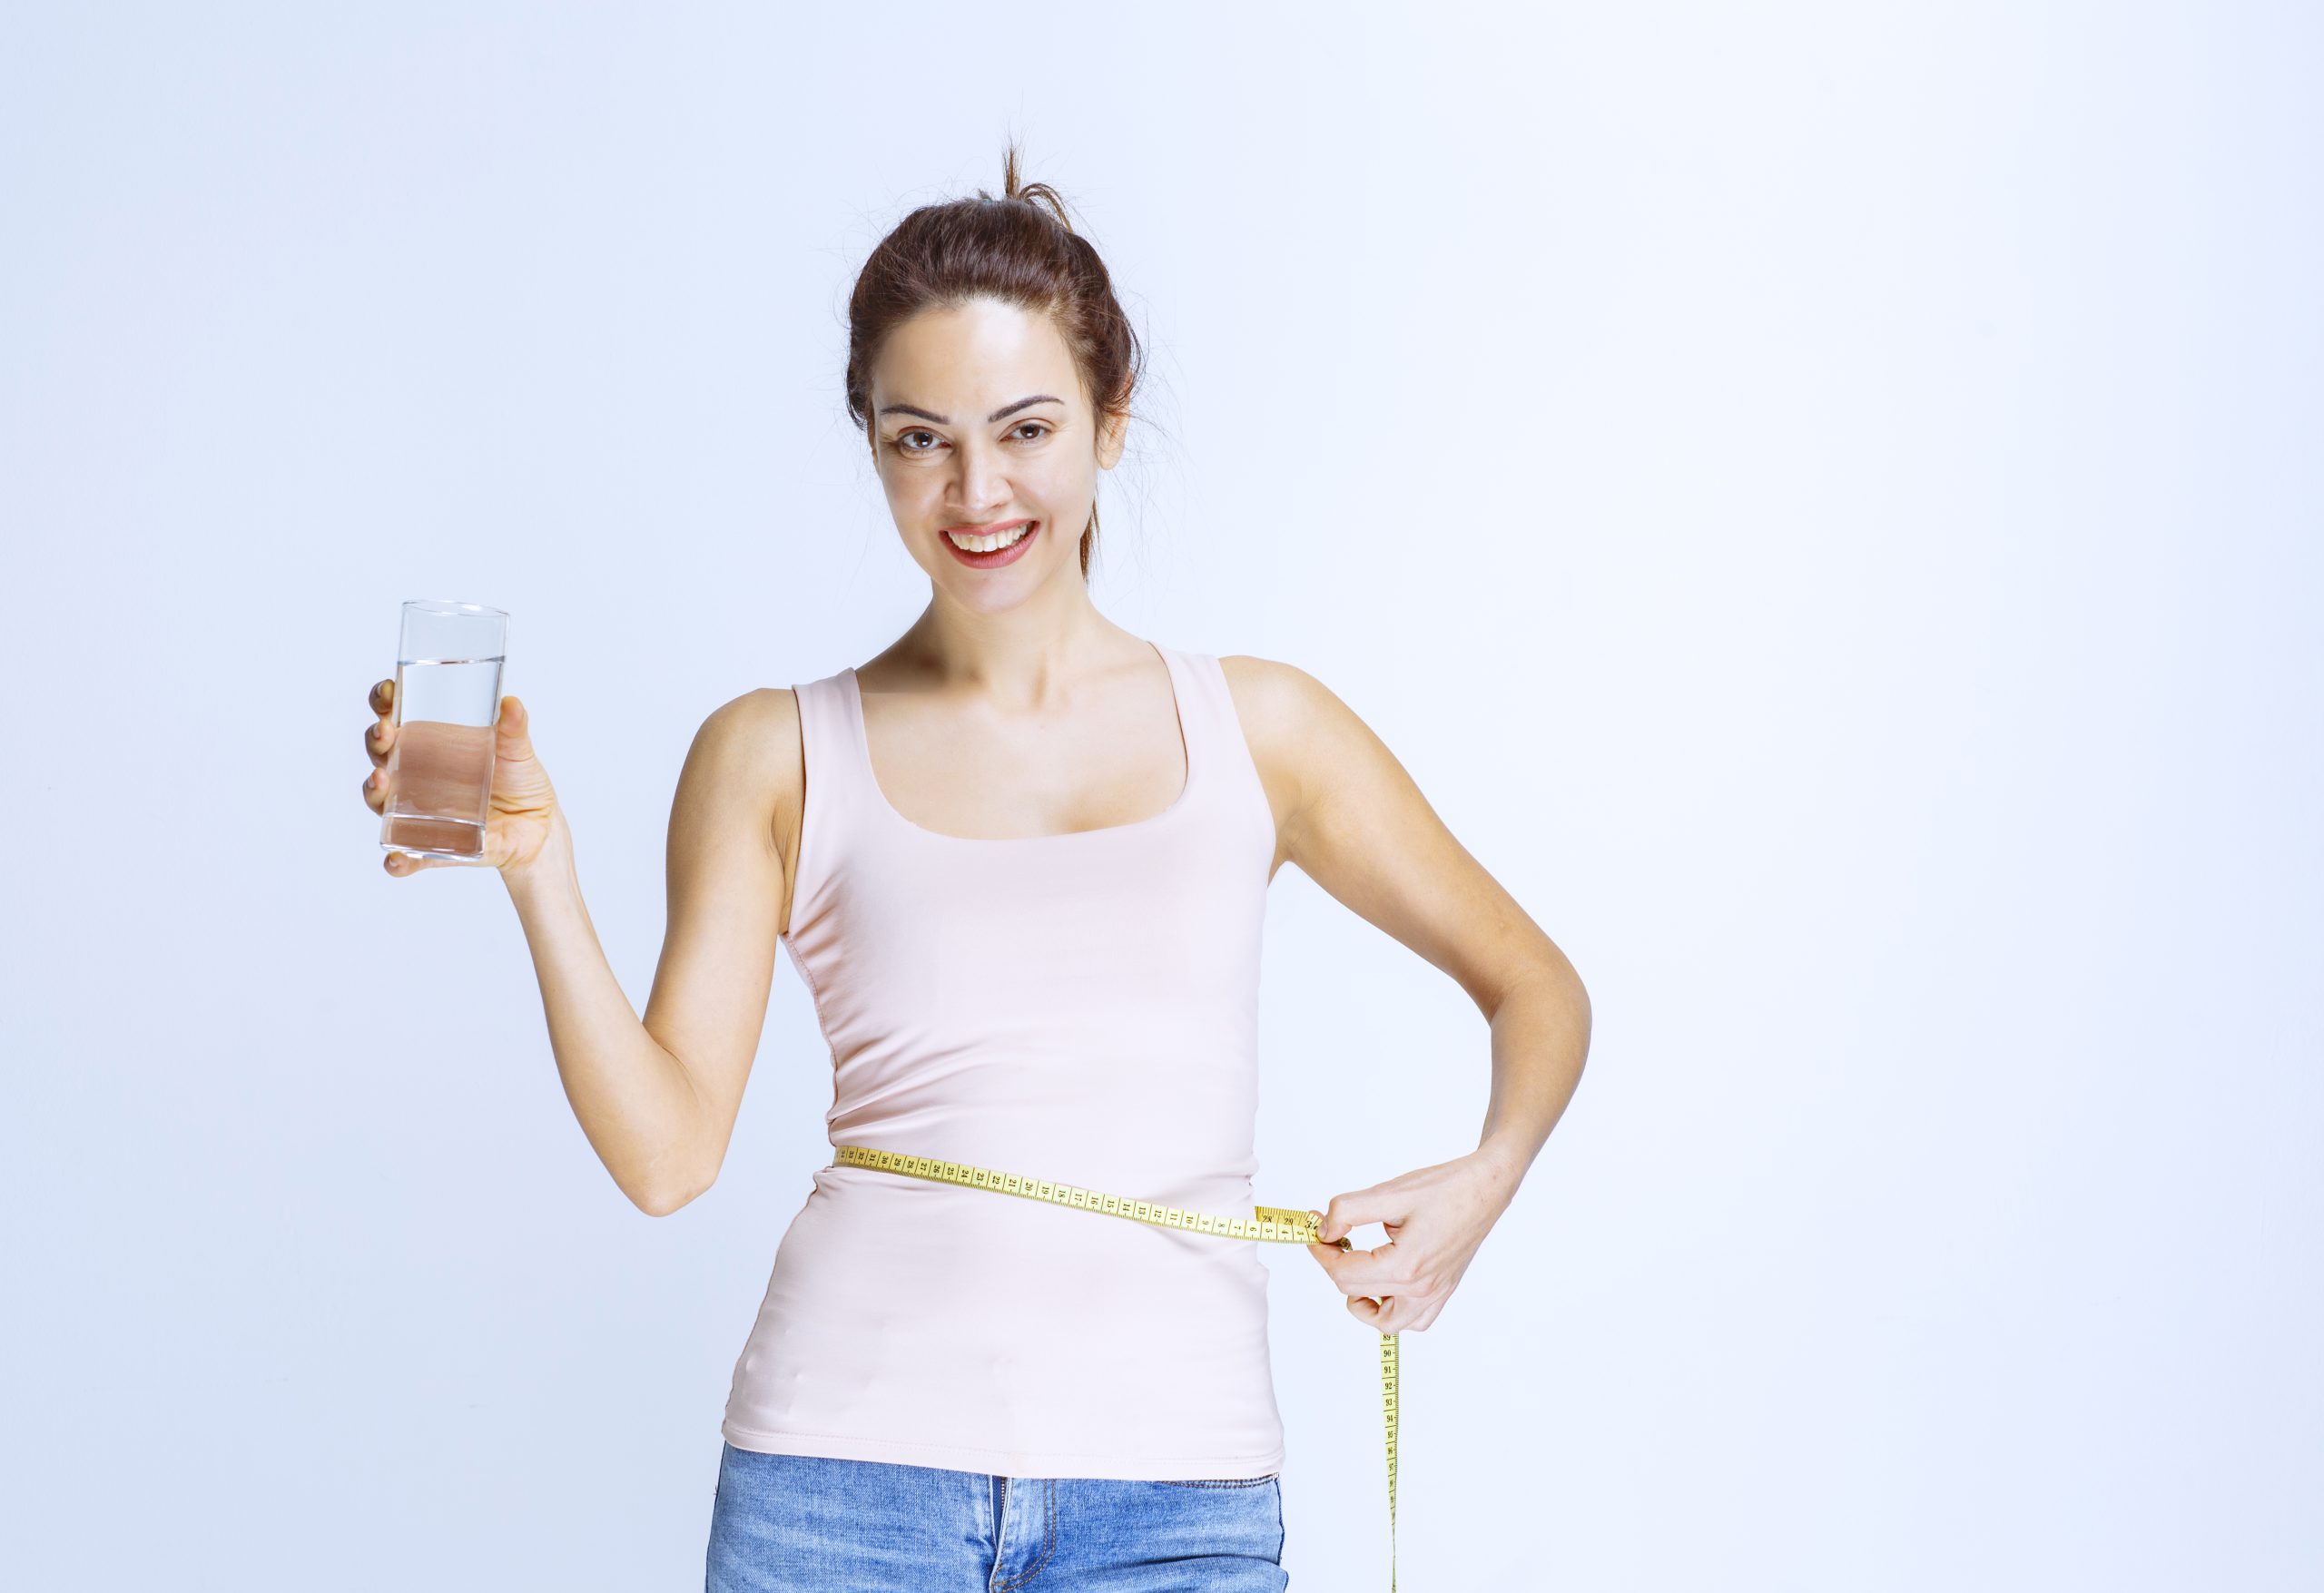 Can drinking too much water after bariatric surgery be good?